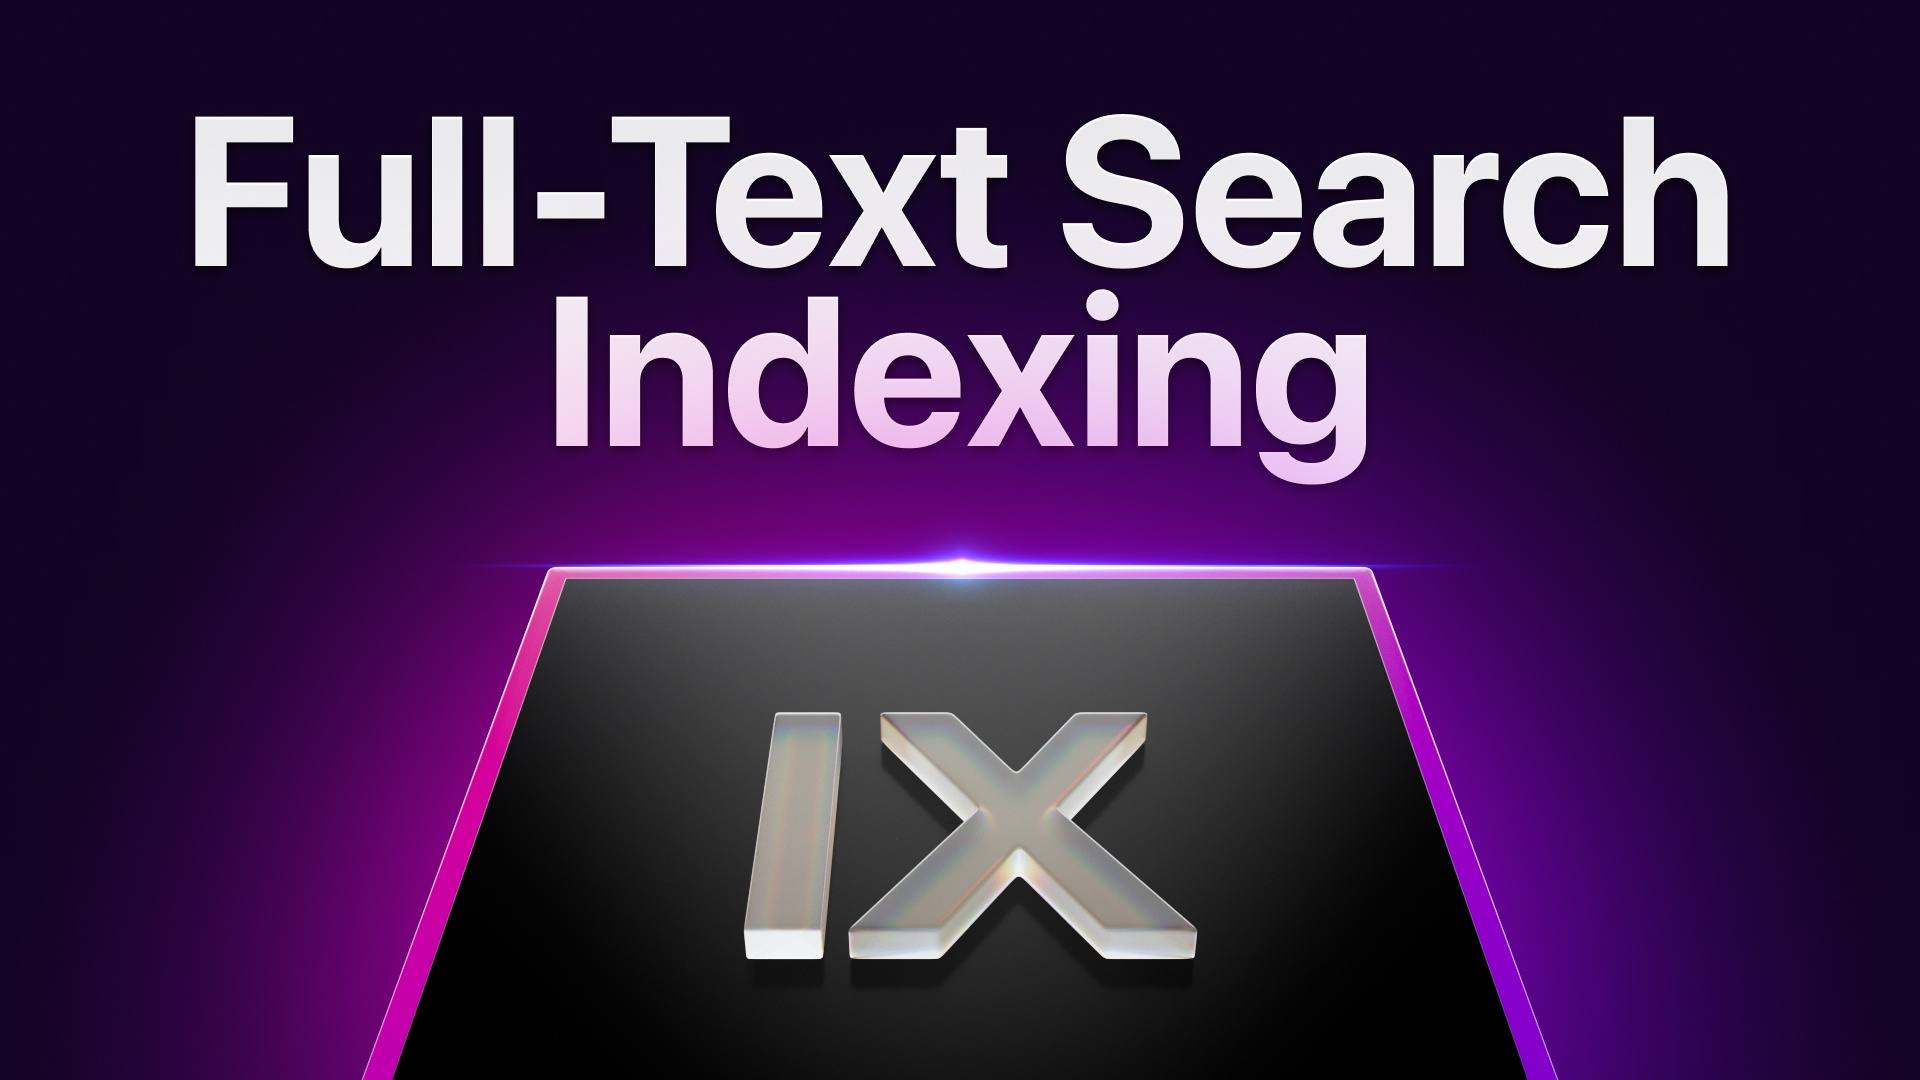 Full-Text Search Indexing